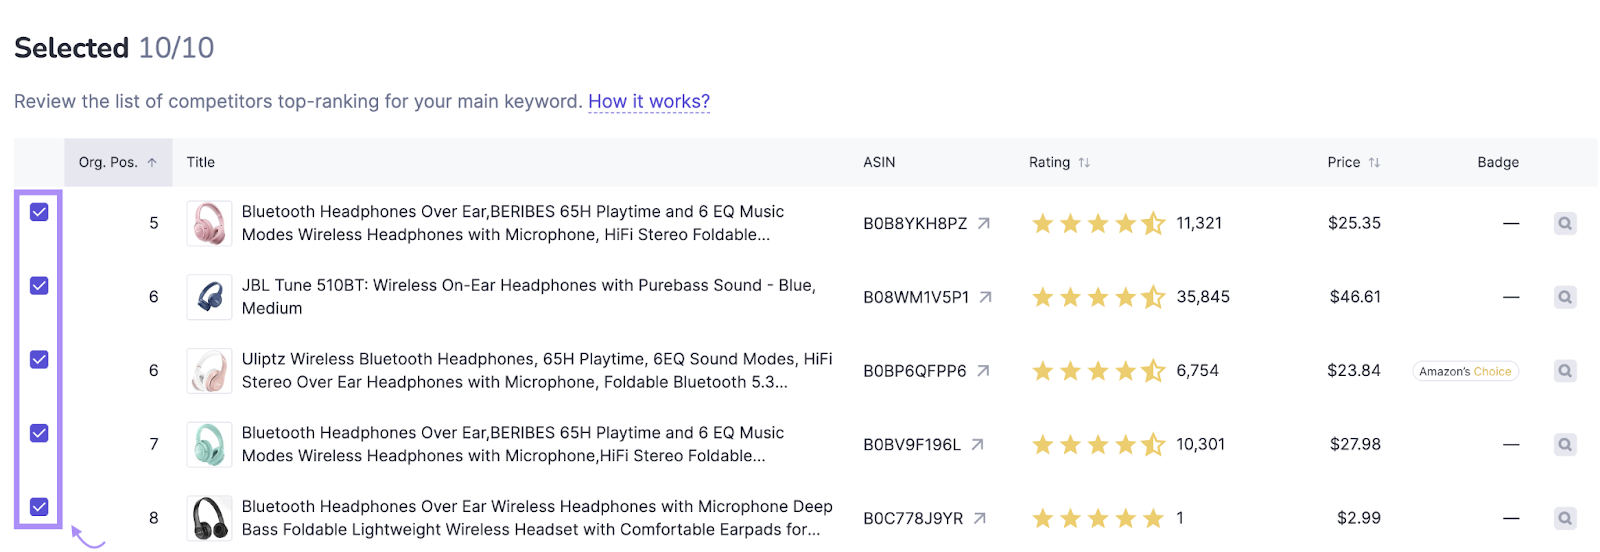 Instant Keyword Research for Amazon tool results for "wireless headphones"